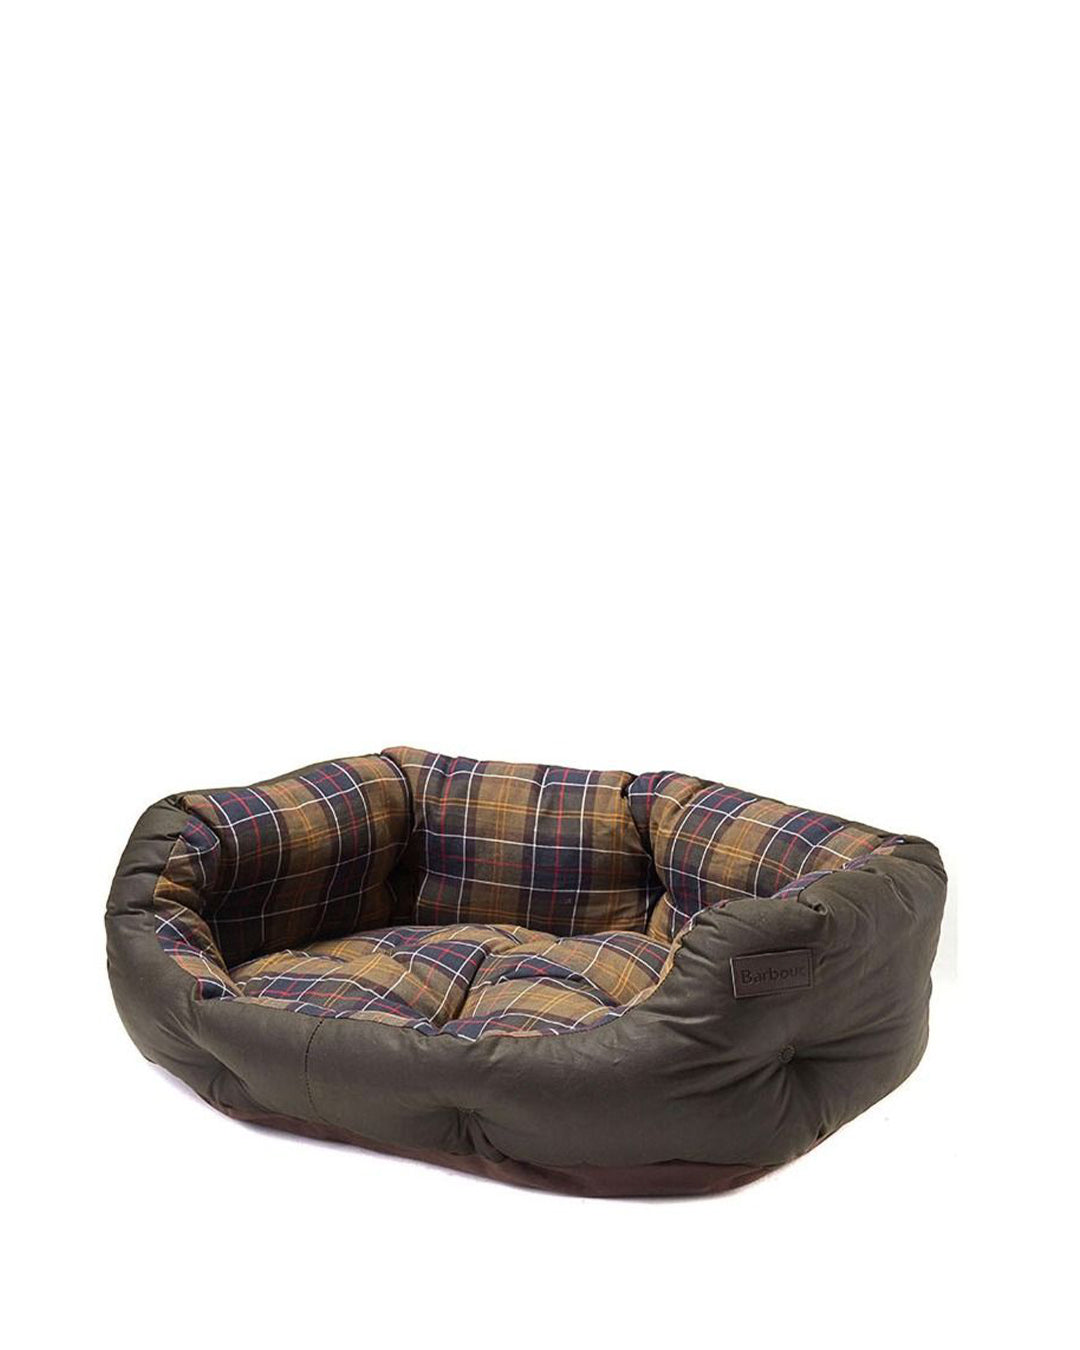 Barbour Wax/Cotton Dog Bed 30in